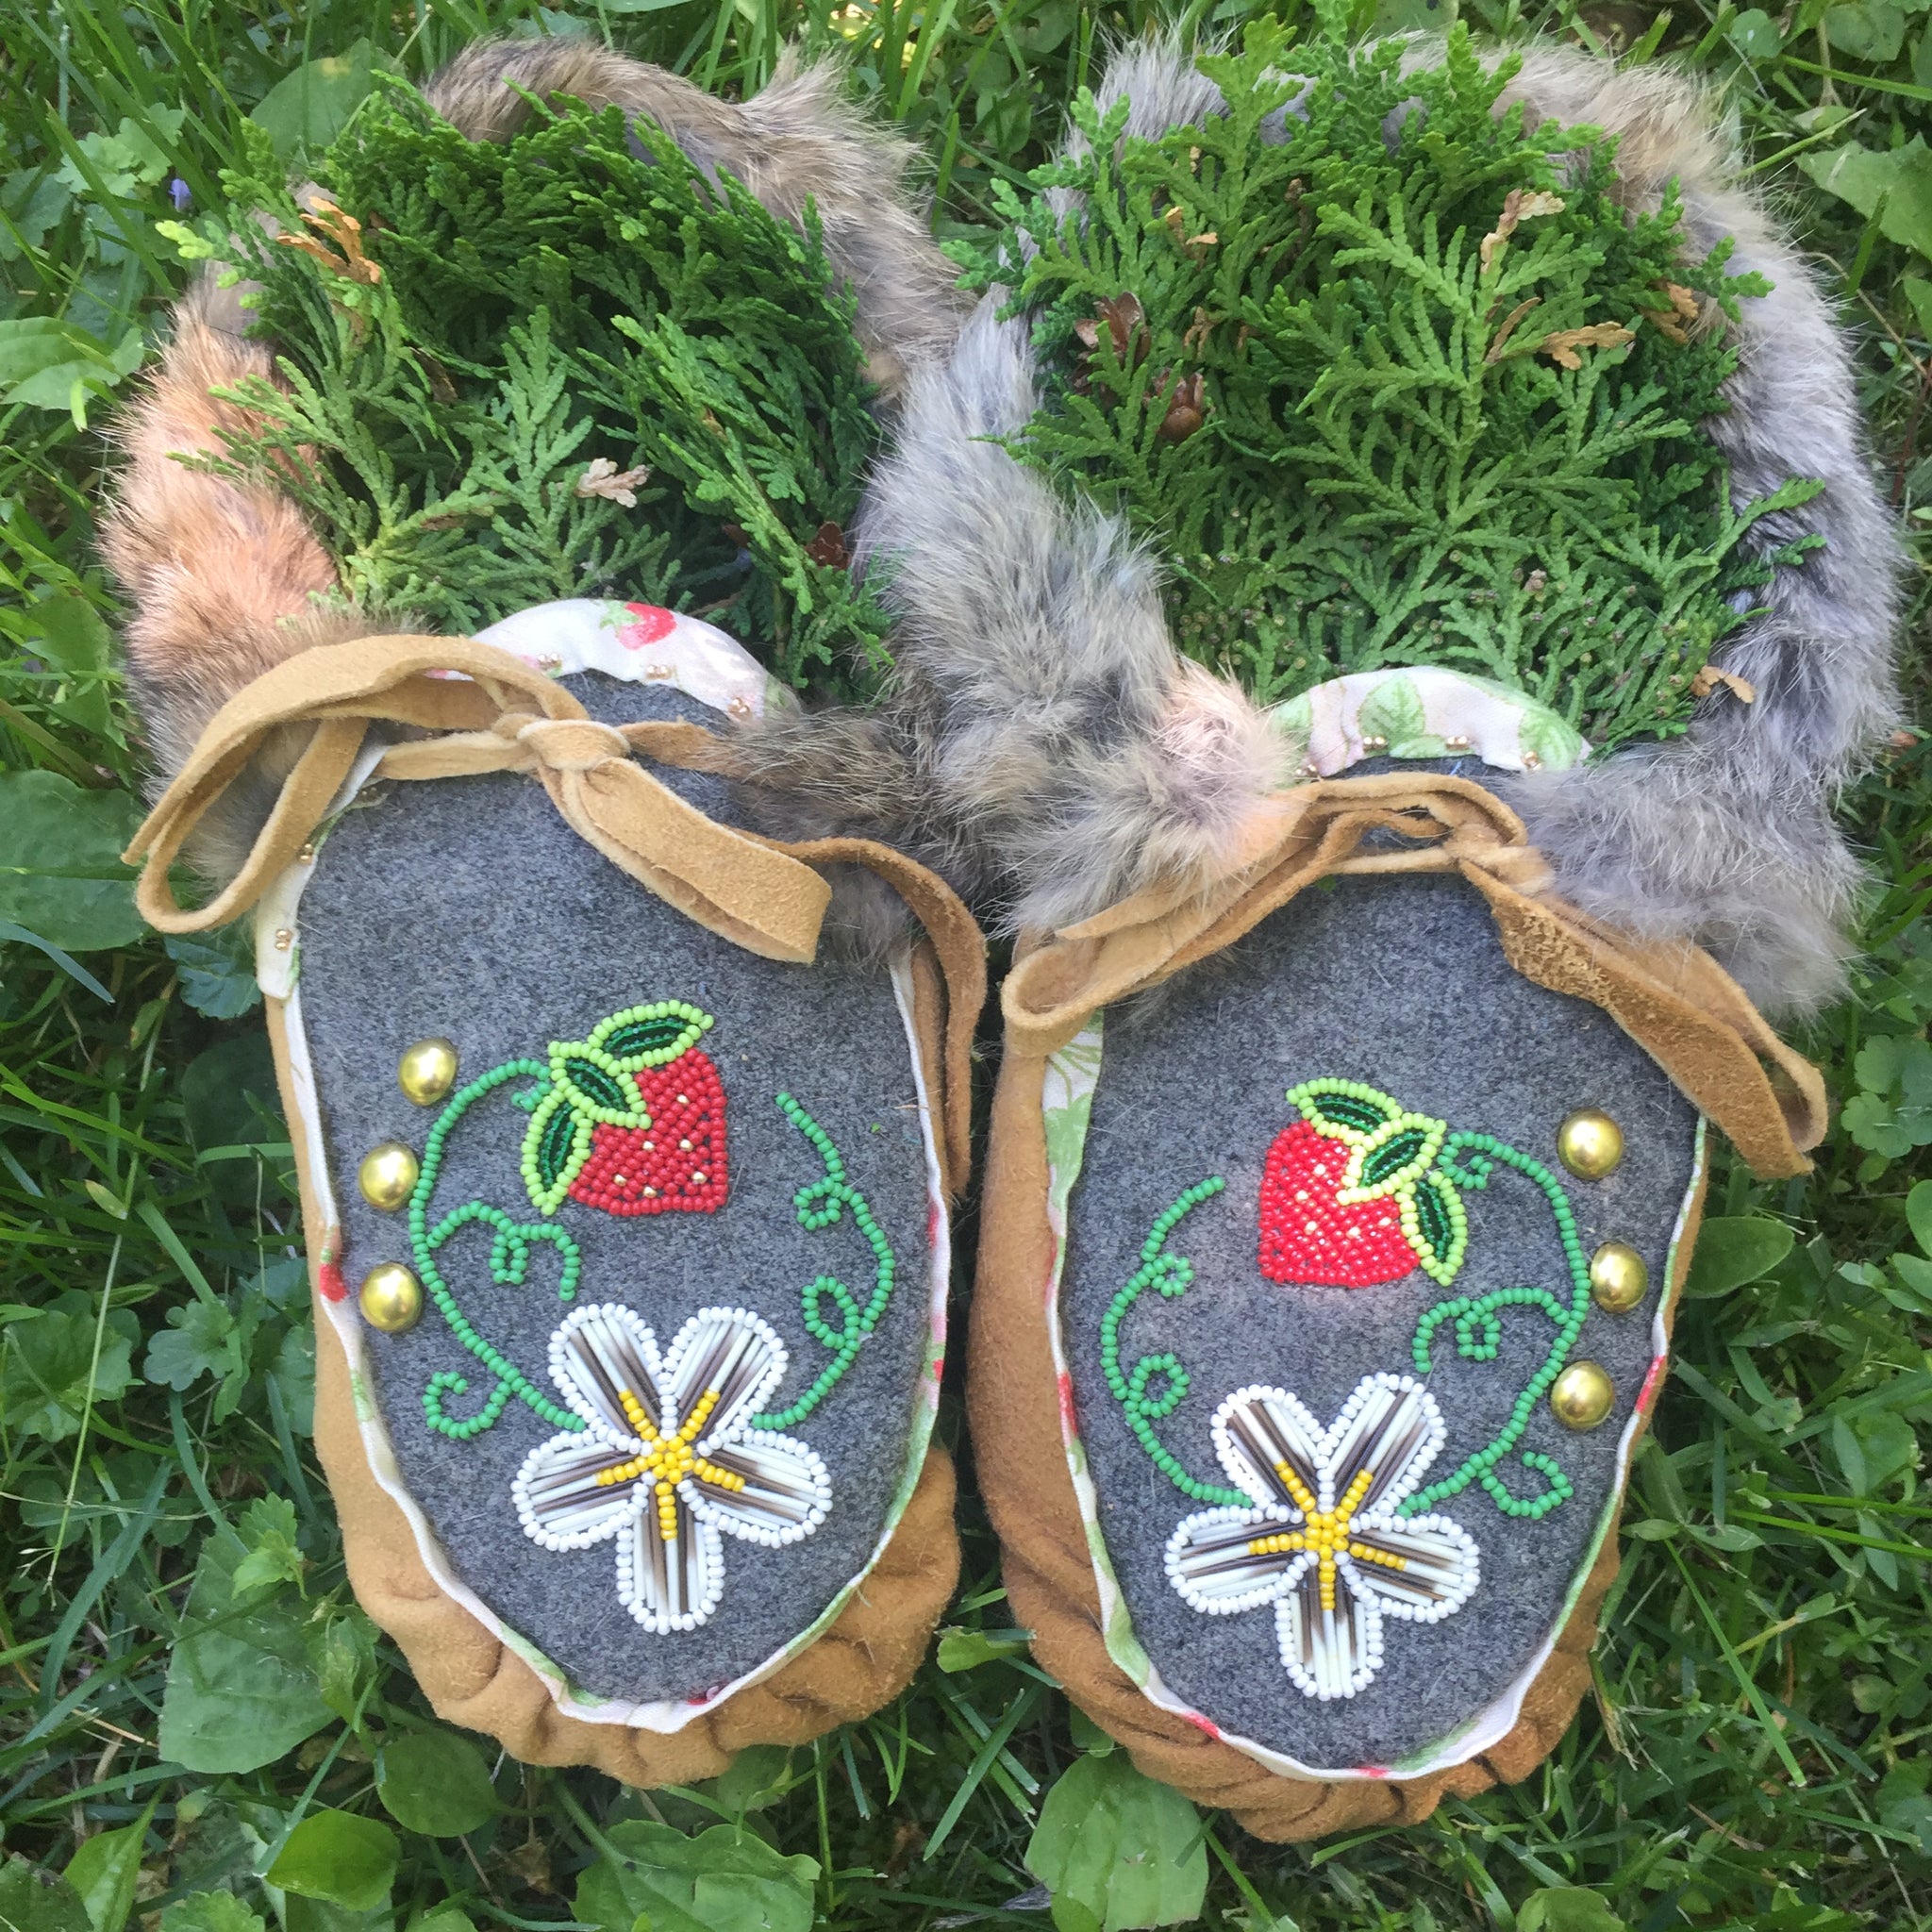 Moccasin Patterning Video Release!